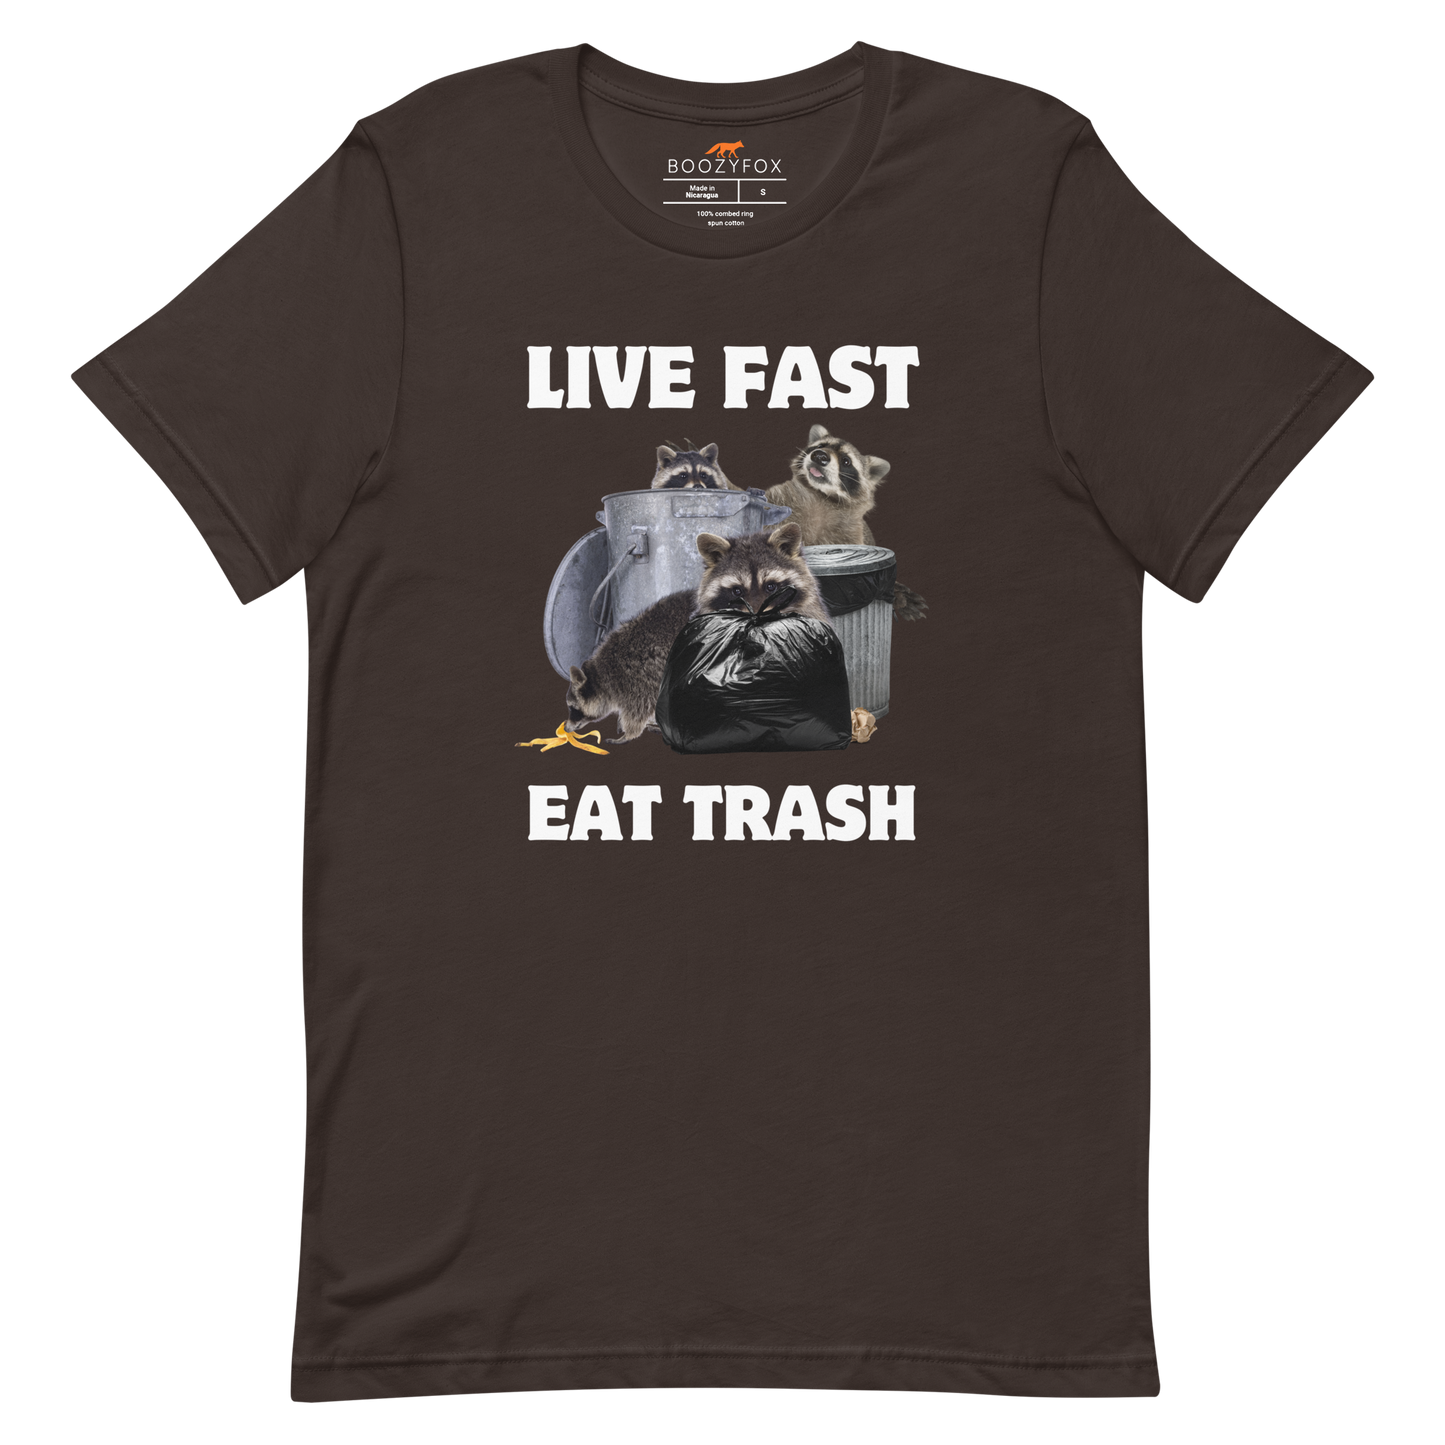 Brown Premium Raccoon Tee featuring a funny 'Live Fast Eat Trash' graphic on the chest - Funny Graphic Raccoon Tees - Boozy Fox